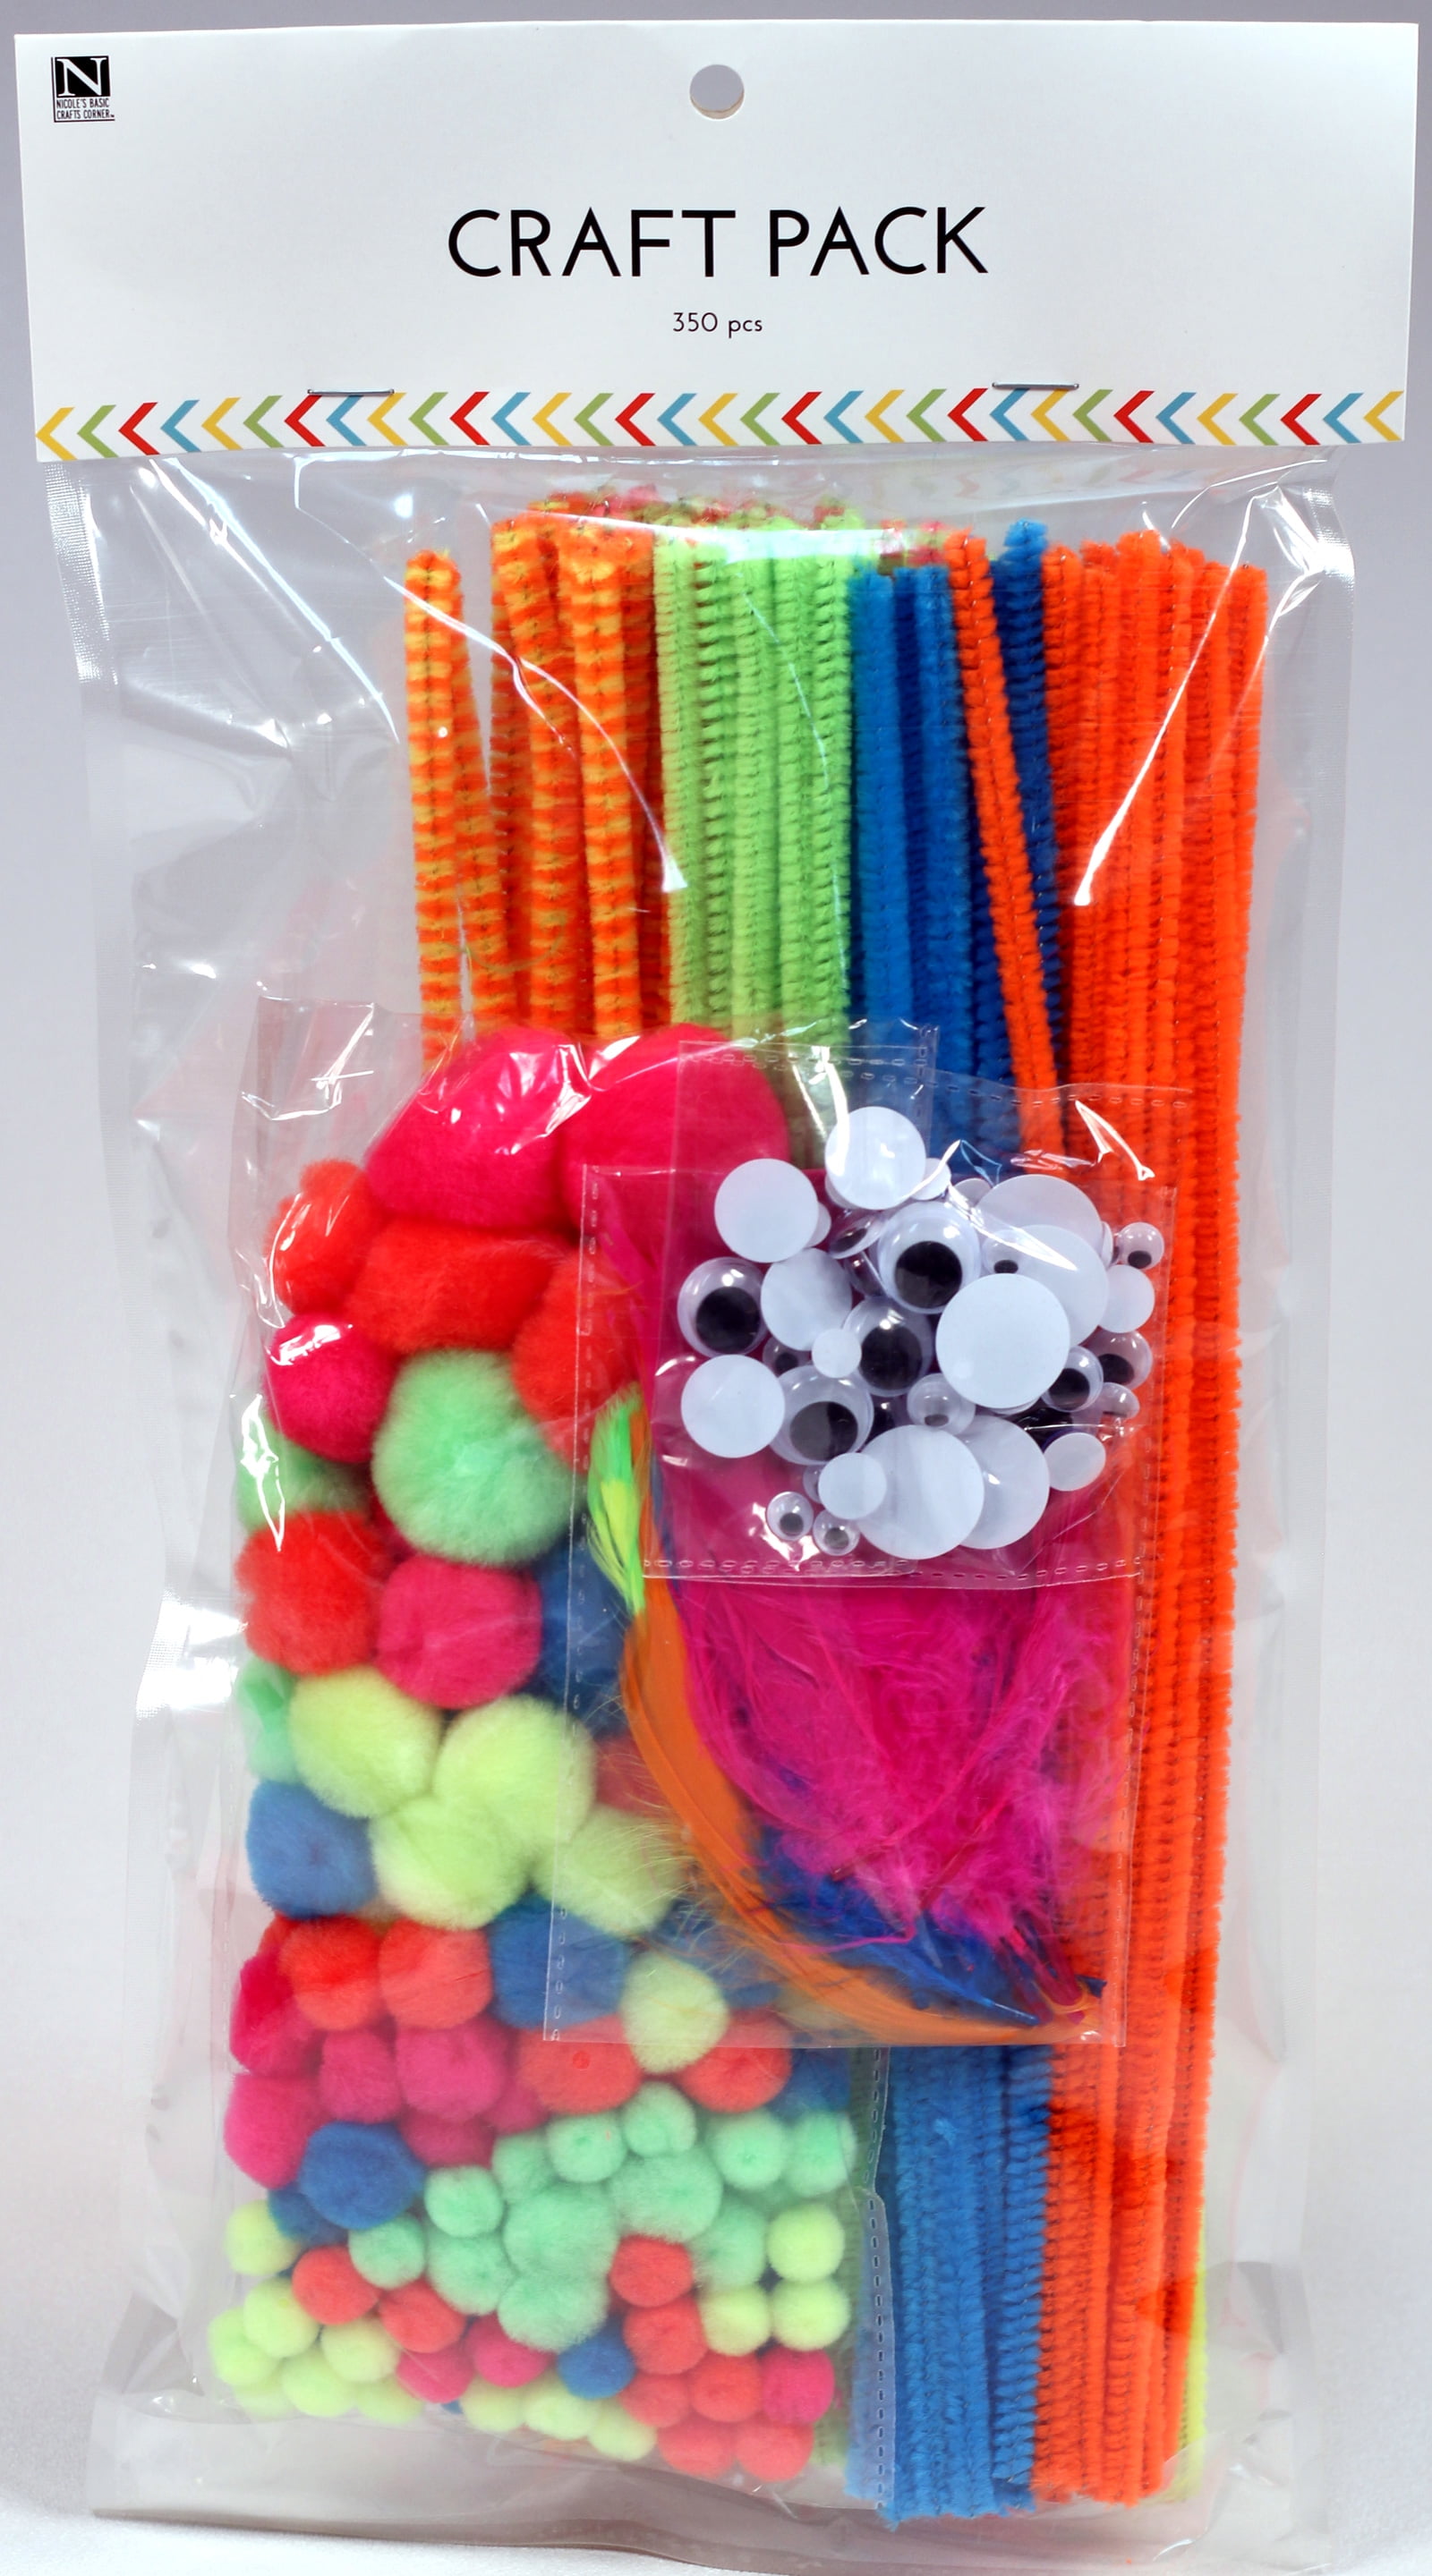 Googly Wiggle Eyes Neon Colors Craft Kit Value Pack 350 Pieces Includes Pom Poms DIY School Art Projects Kids Crafts Feathers and Chenille Stem Pipe Cleaners 